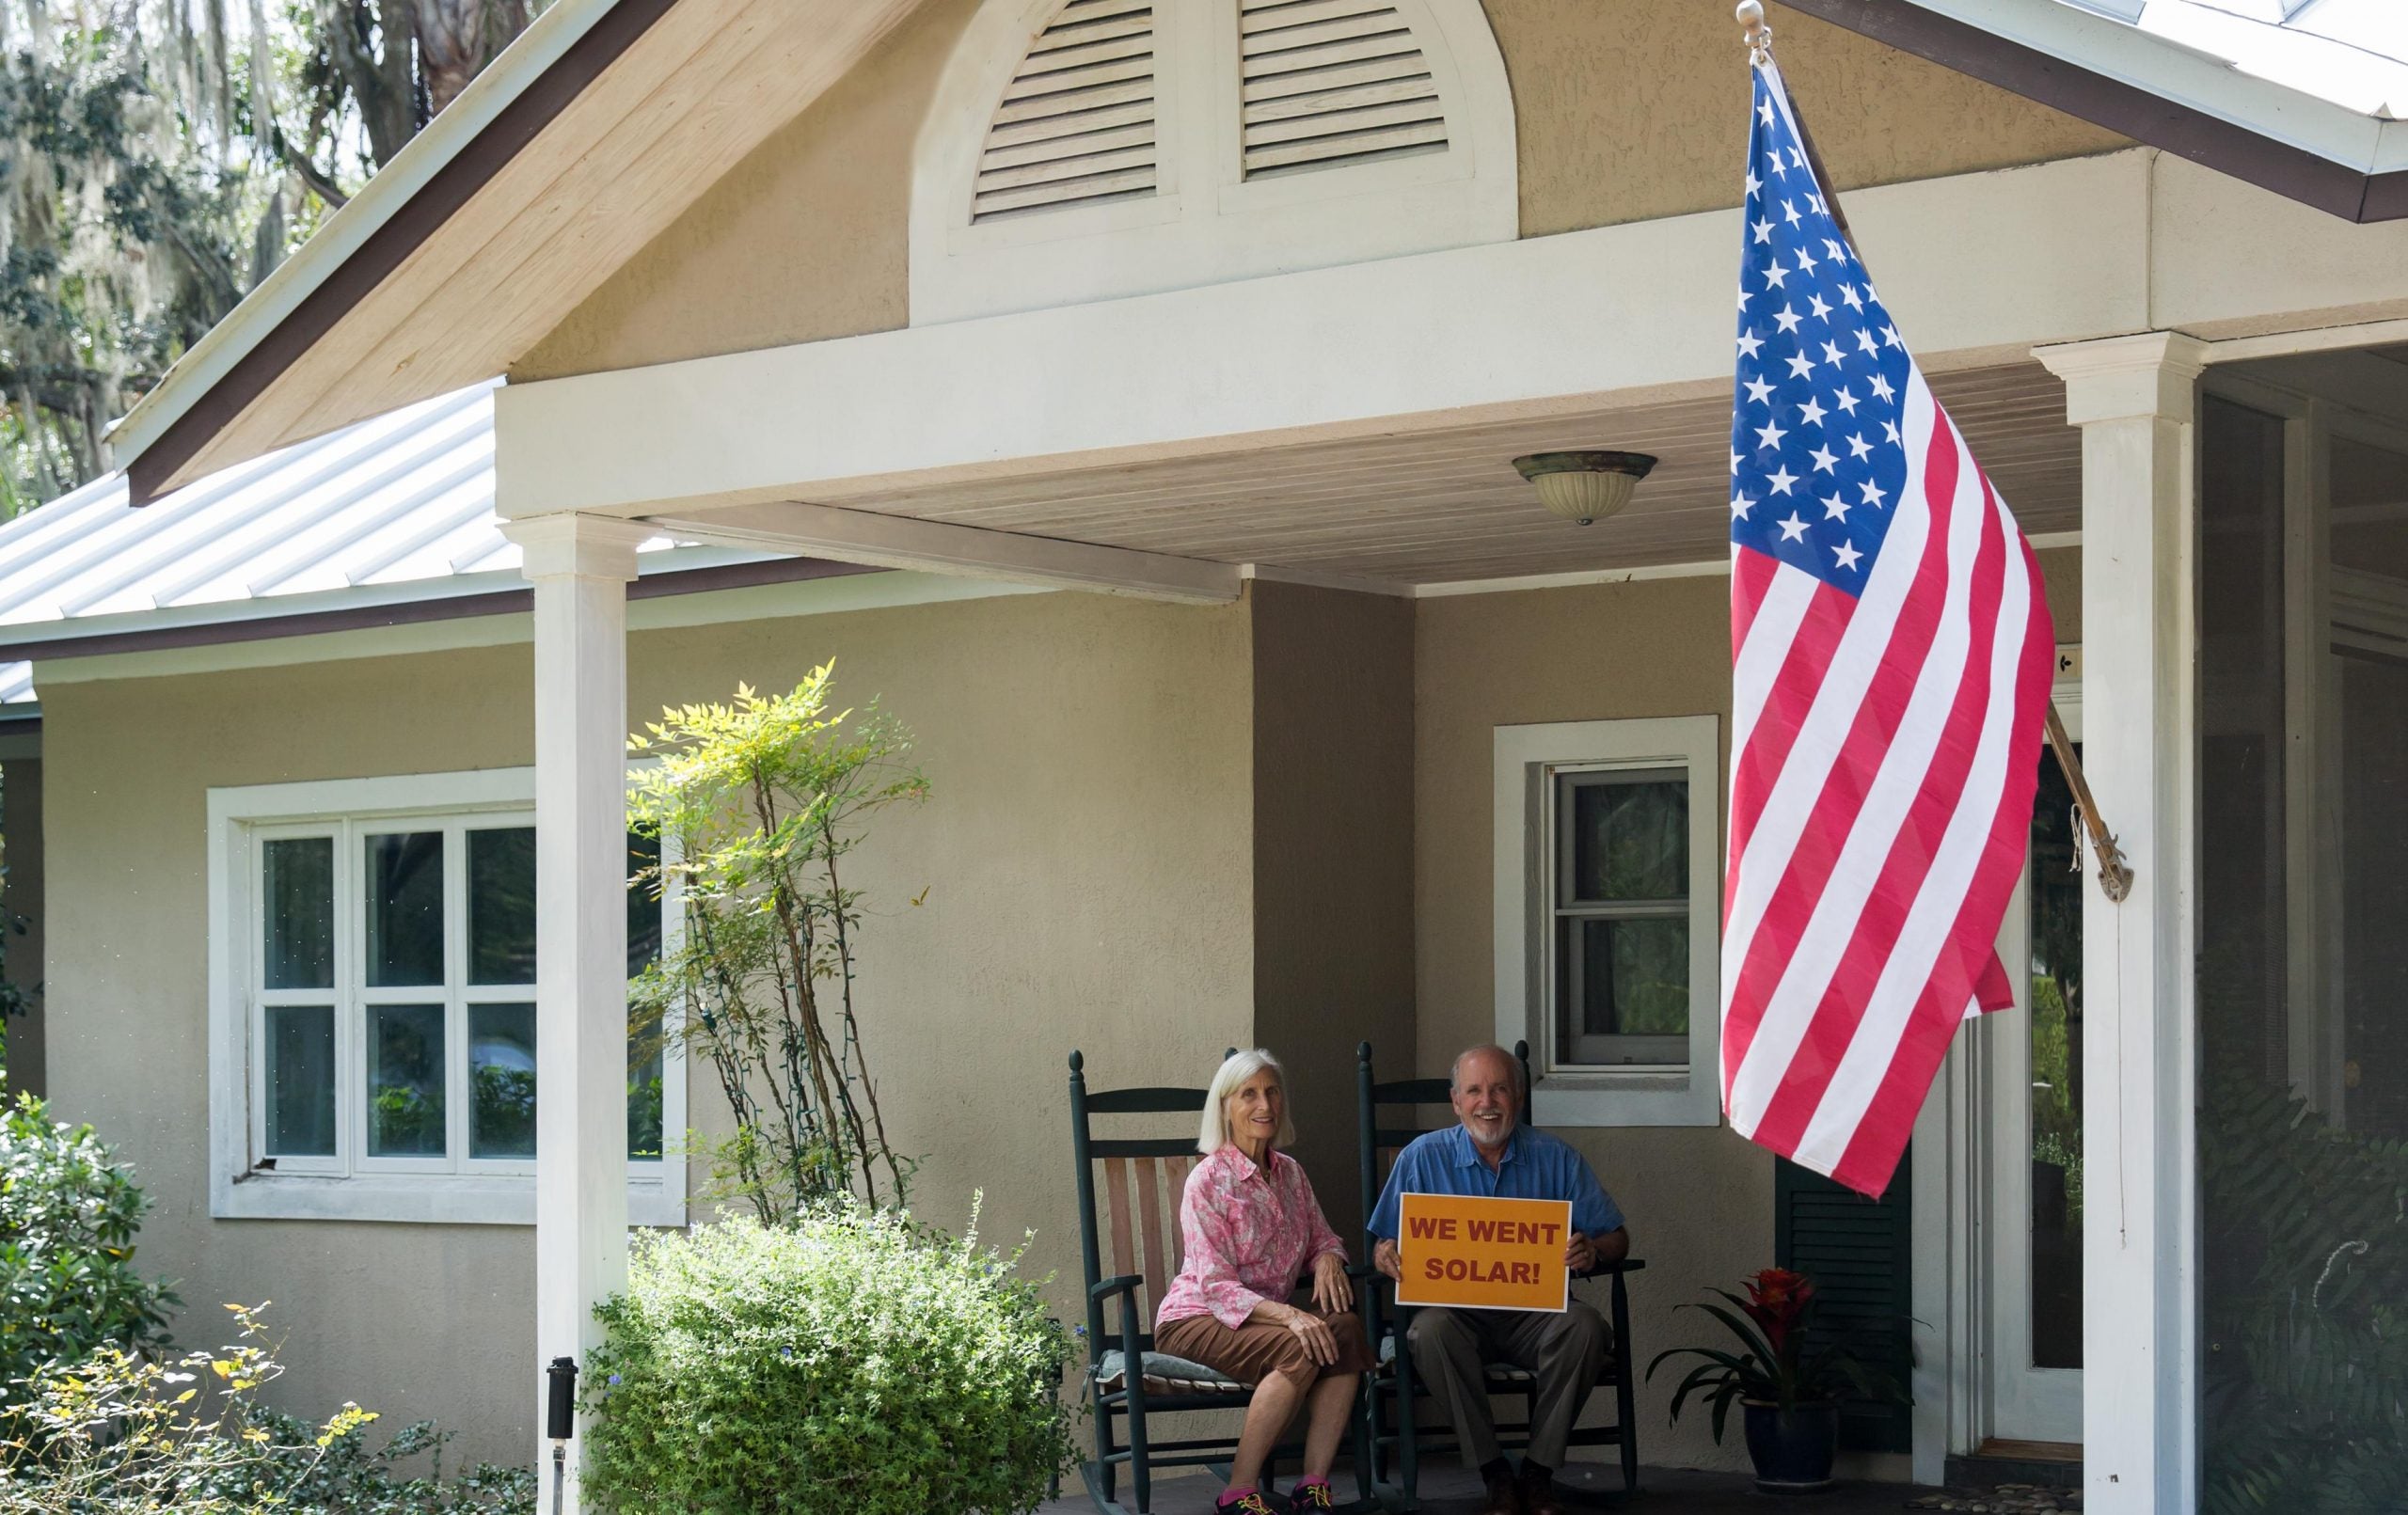 A couple sits on their porch with a sign that says "WE WENT SOLAR" in front of an American flag